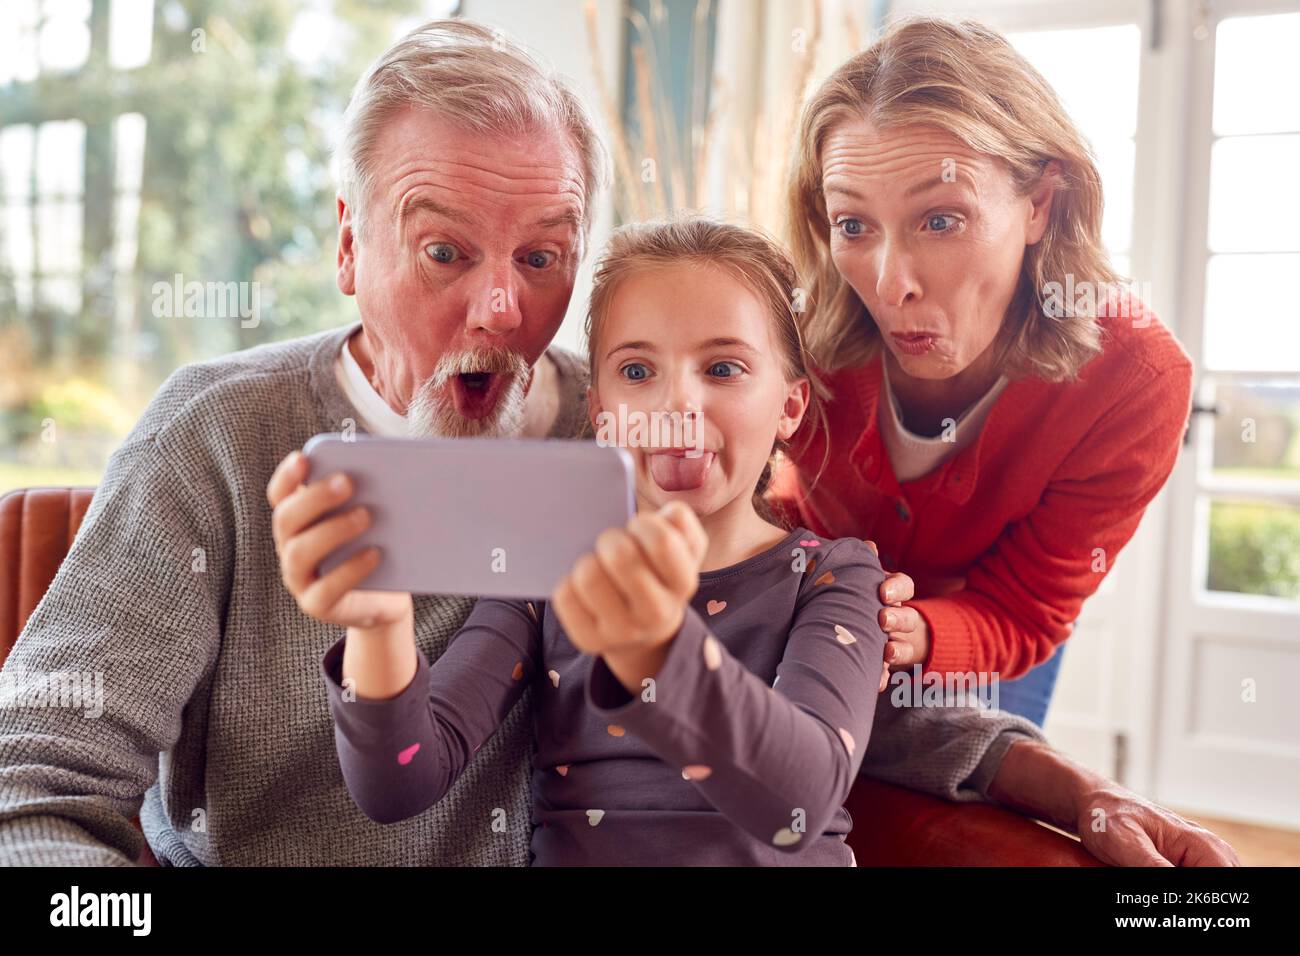 Grandparents With Granddaughter Pulling Faces Posing For Selfie On Mobile Phone At Home Together Stock Photo